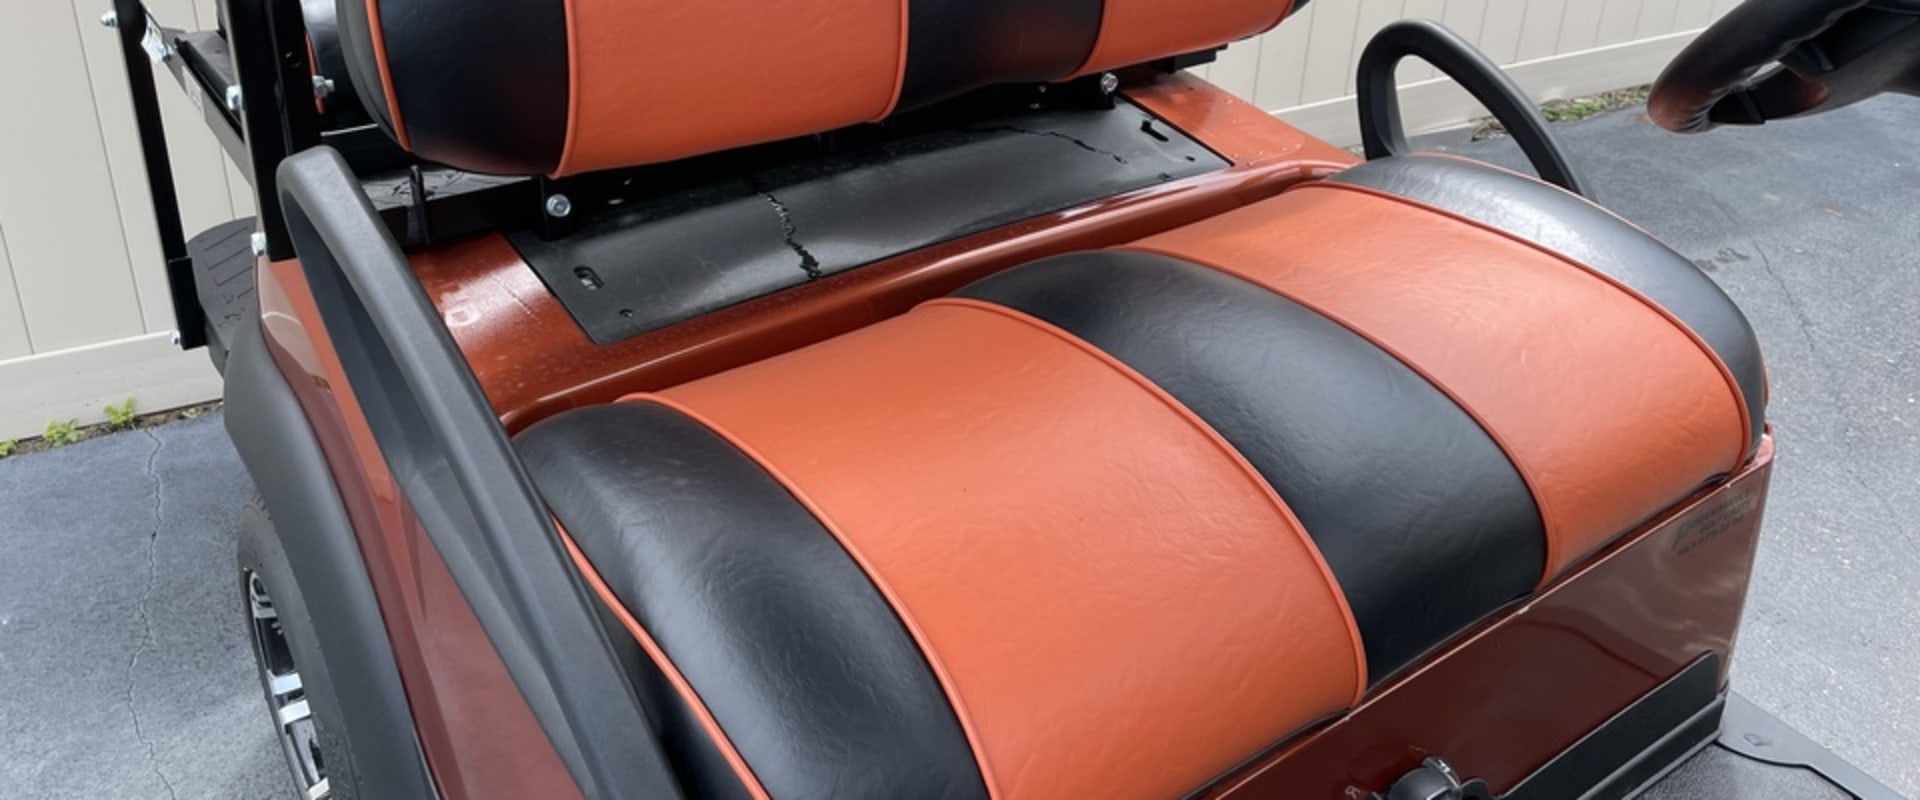 Trends in Designer Golf Cart Seat Covers: Protect and Personalize Your Ride